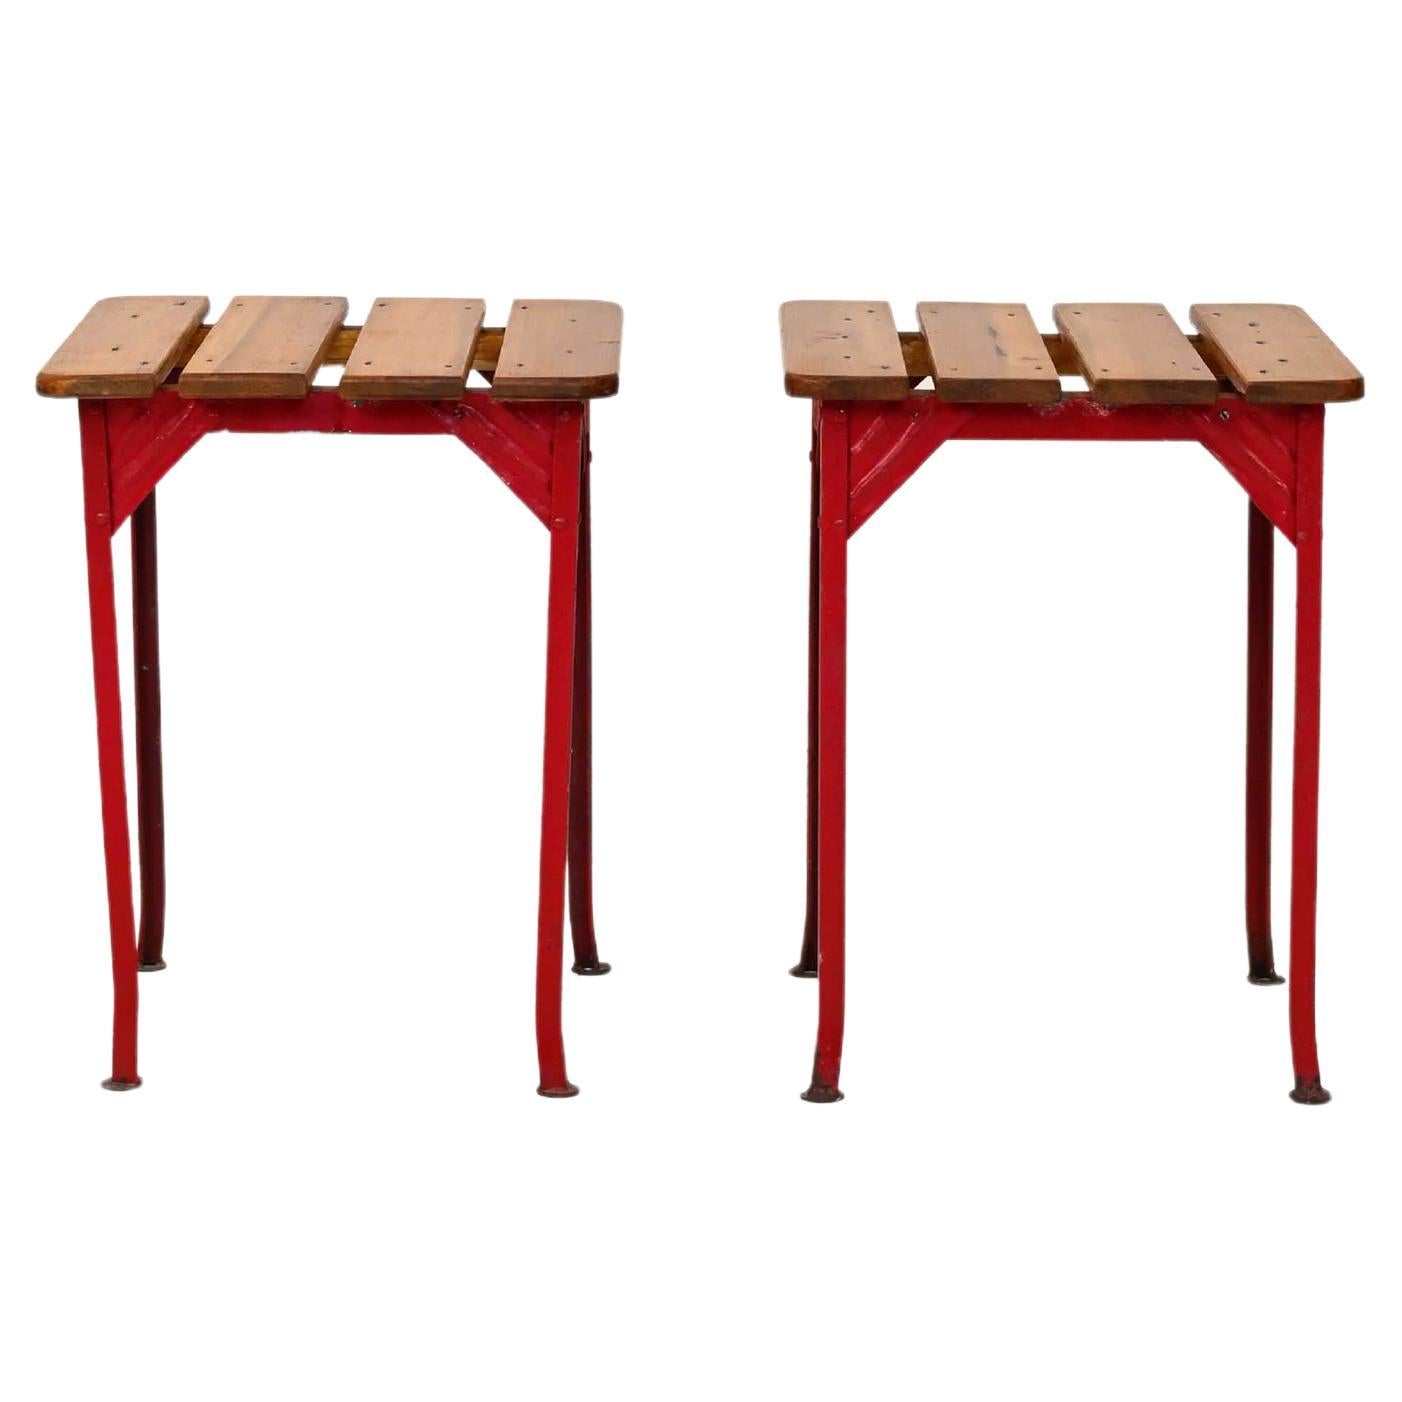 Pair of Red Metal and Wood Stools